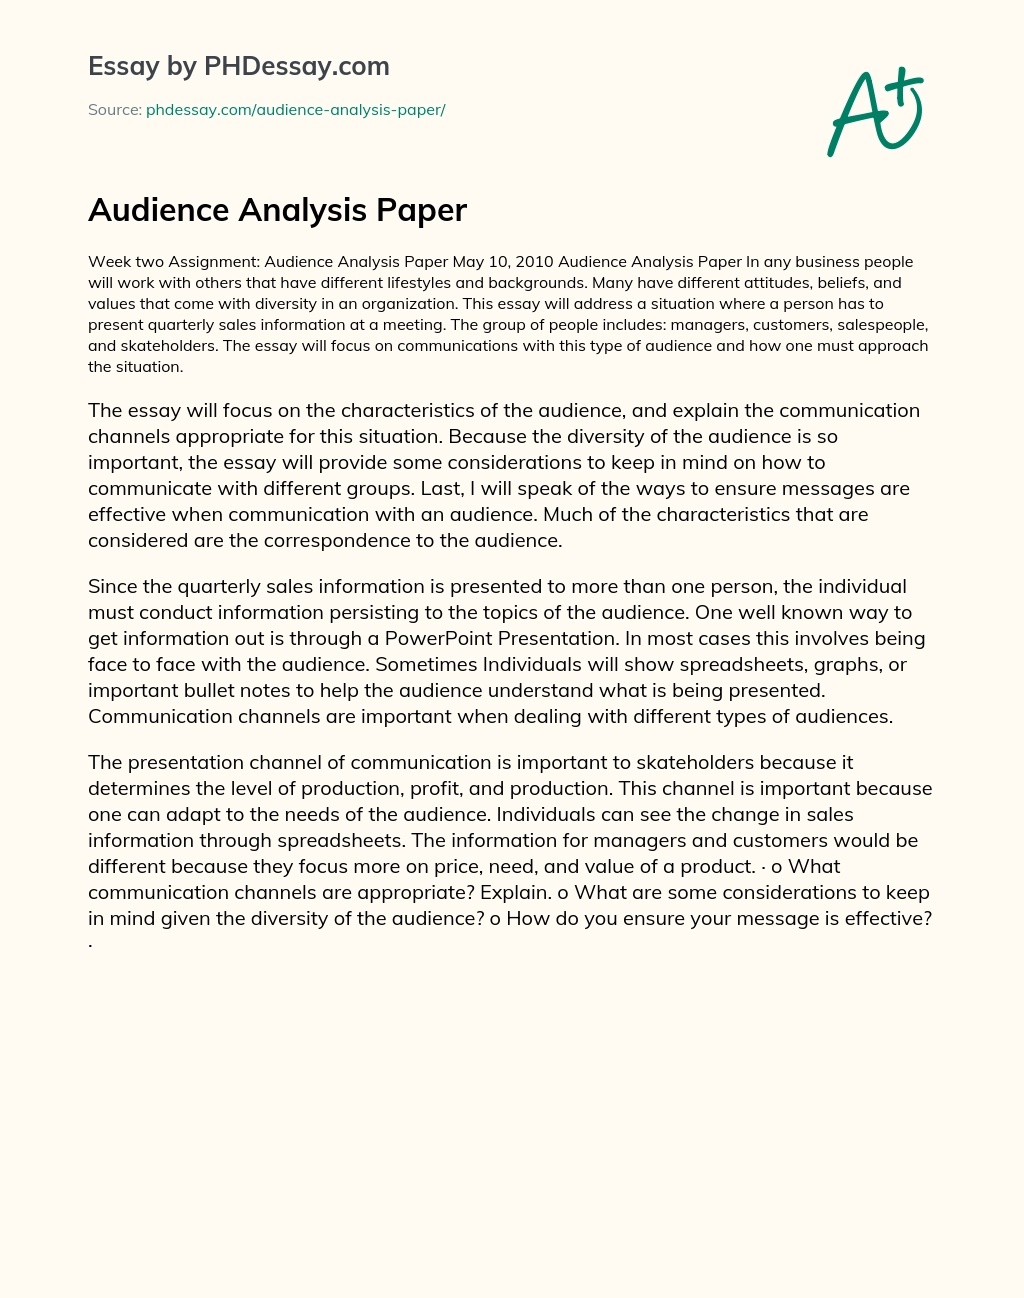 Реферат: Public Speaking Essay Research Paper Audience Analysis